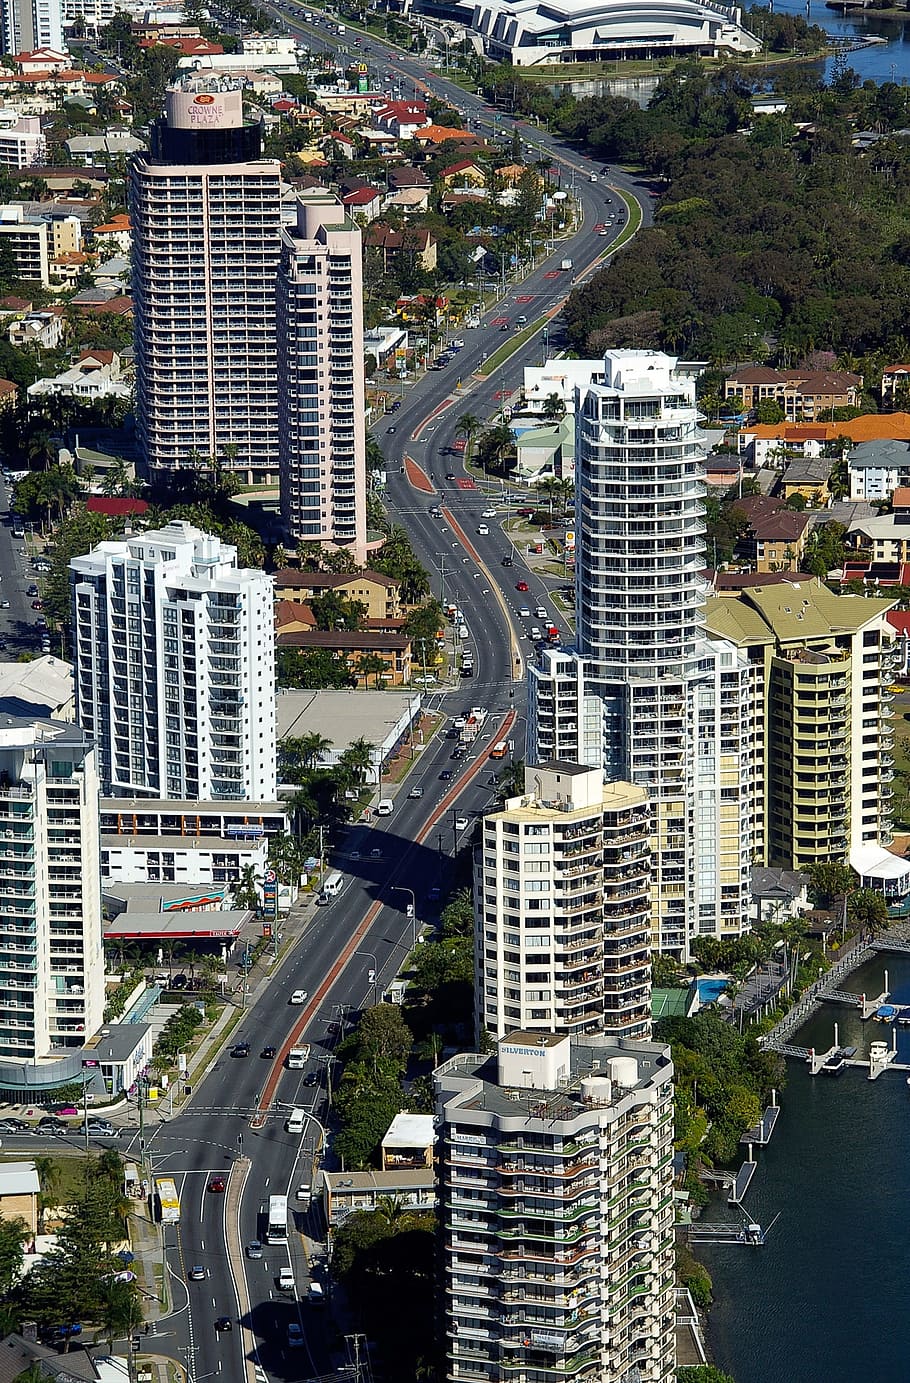 gold coast city, surfer's paradise, skyscrapers, towers, road, buildings, hotels, apartments, zigzag, highway